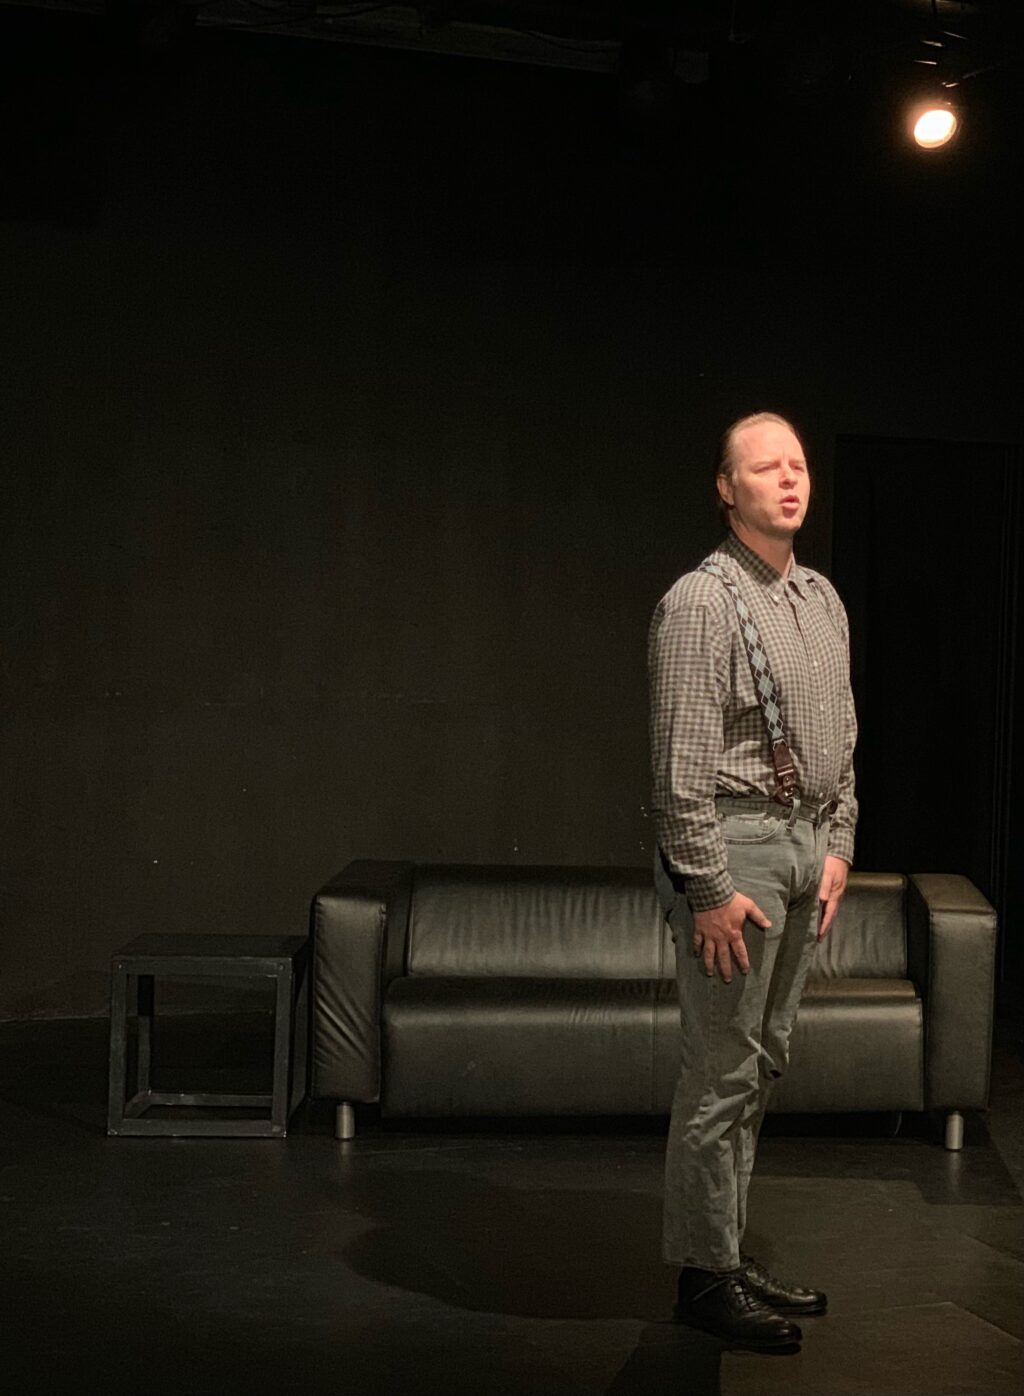 A NoHo Arts theatre interview with "Sins" writer and director William Thompson on stage at this year’s Hollywood Fringe Festival.